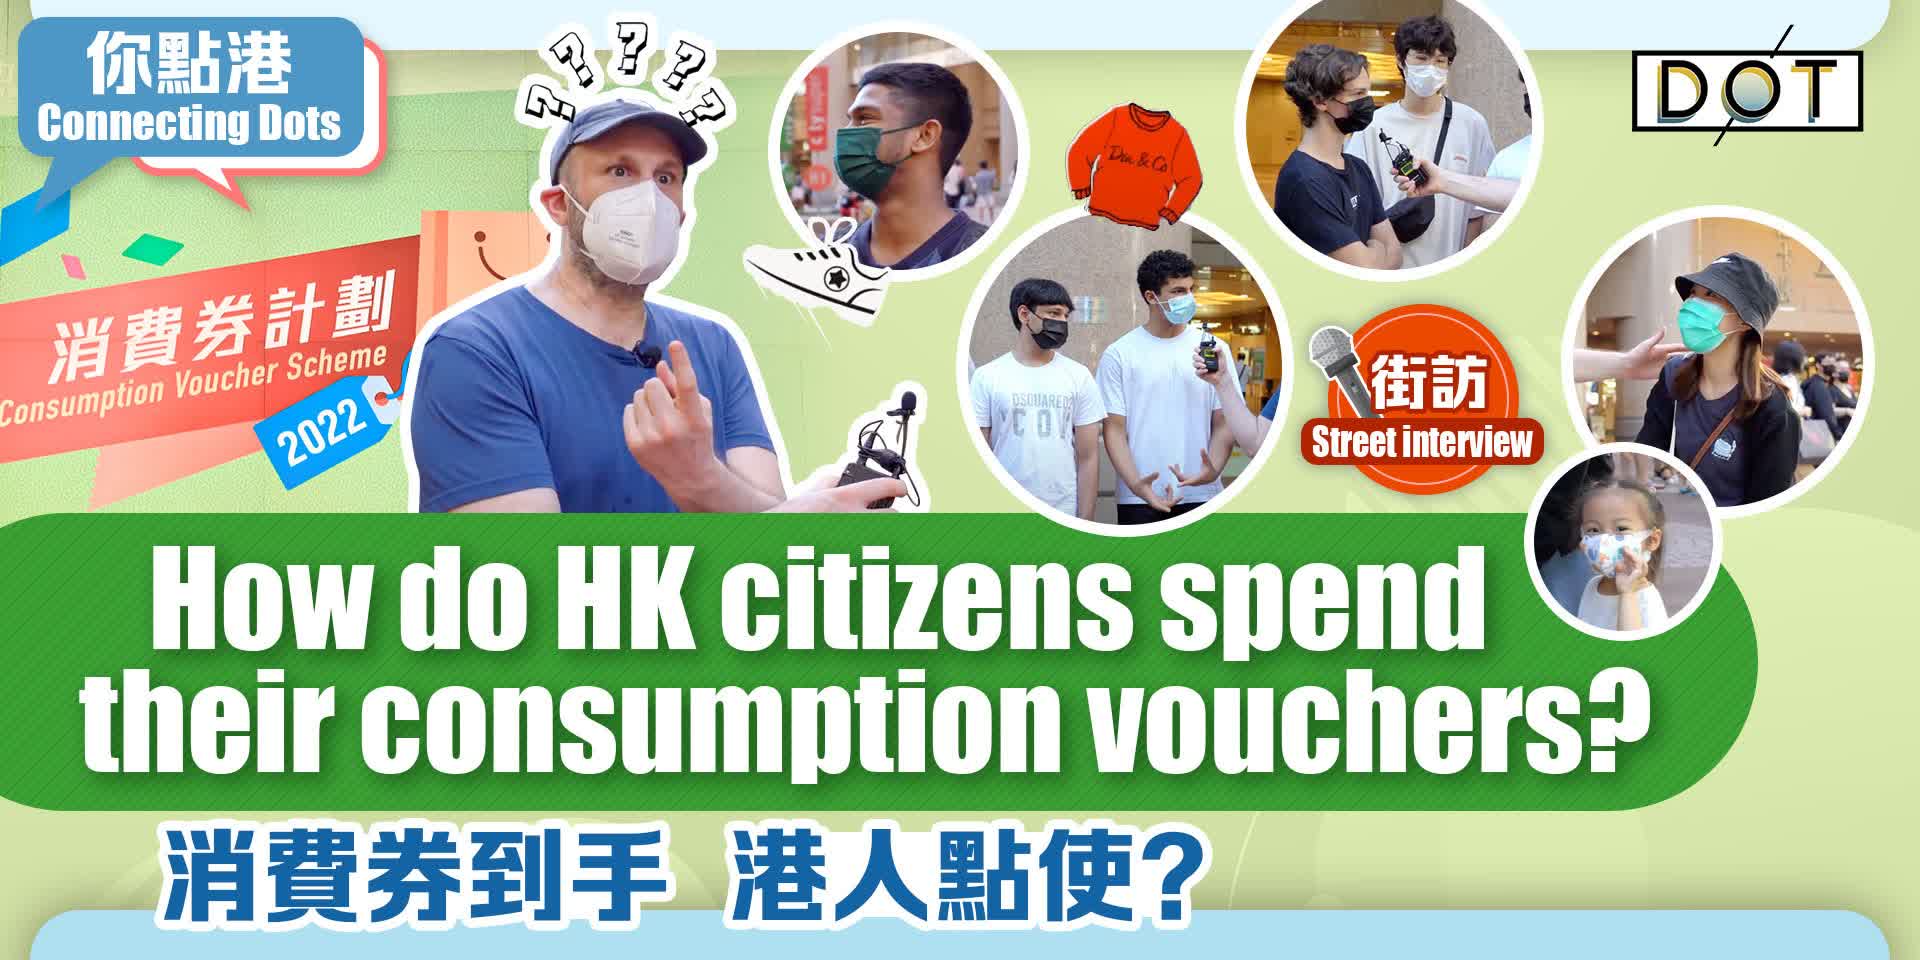 Connecting Dots | (Street interview) How do HK citizens spend their consumption vouchers?